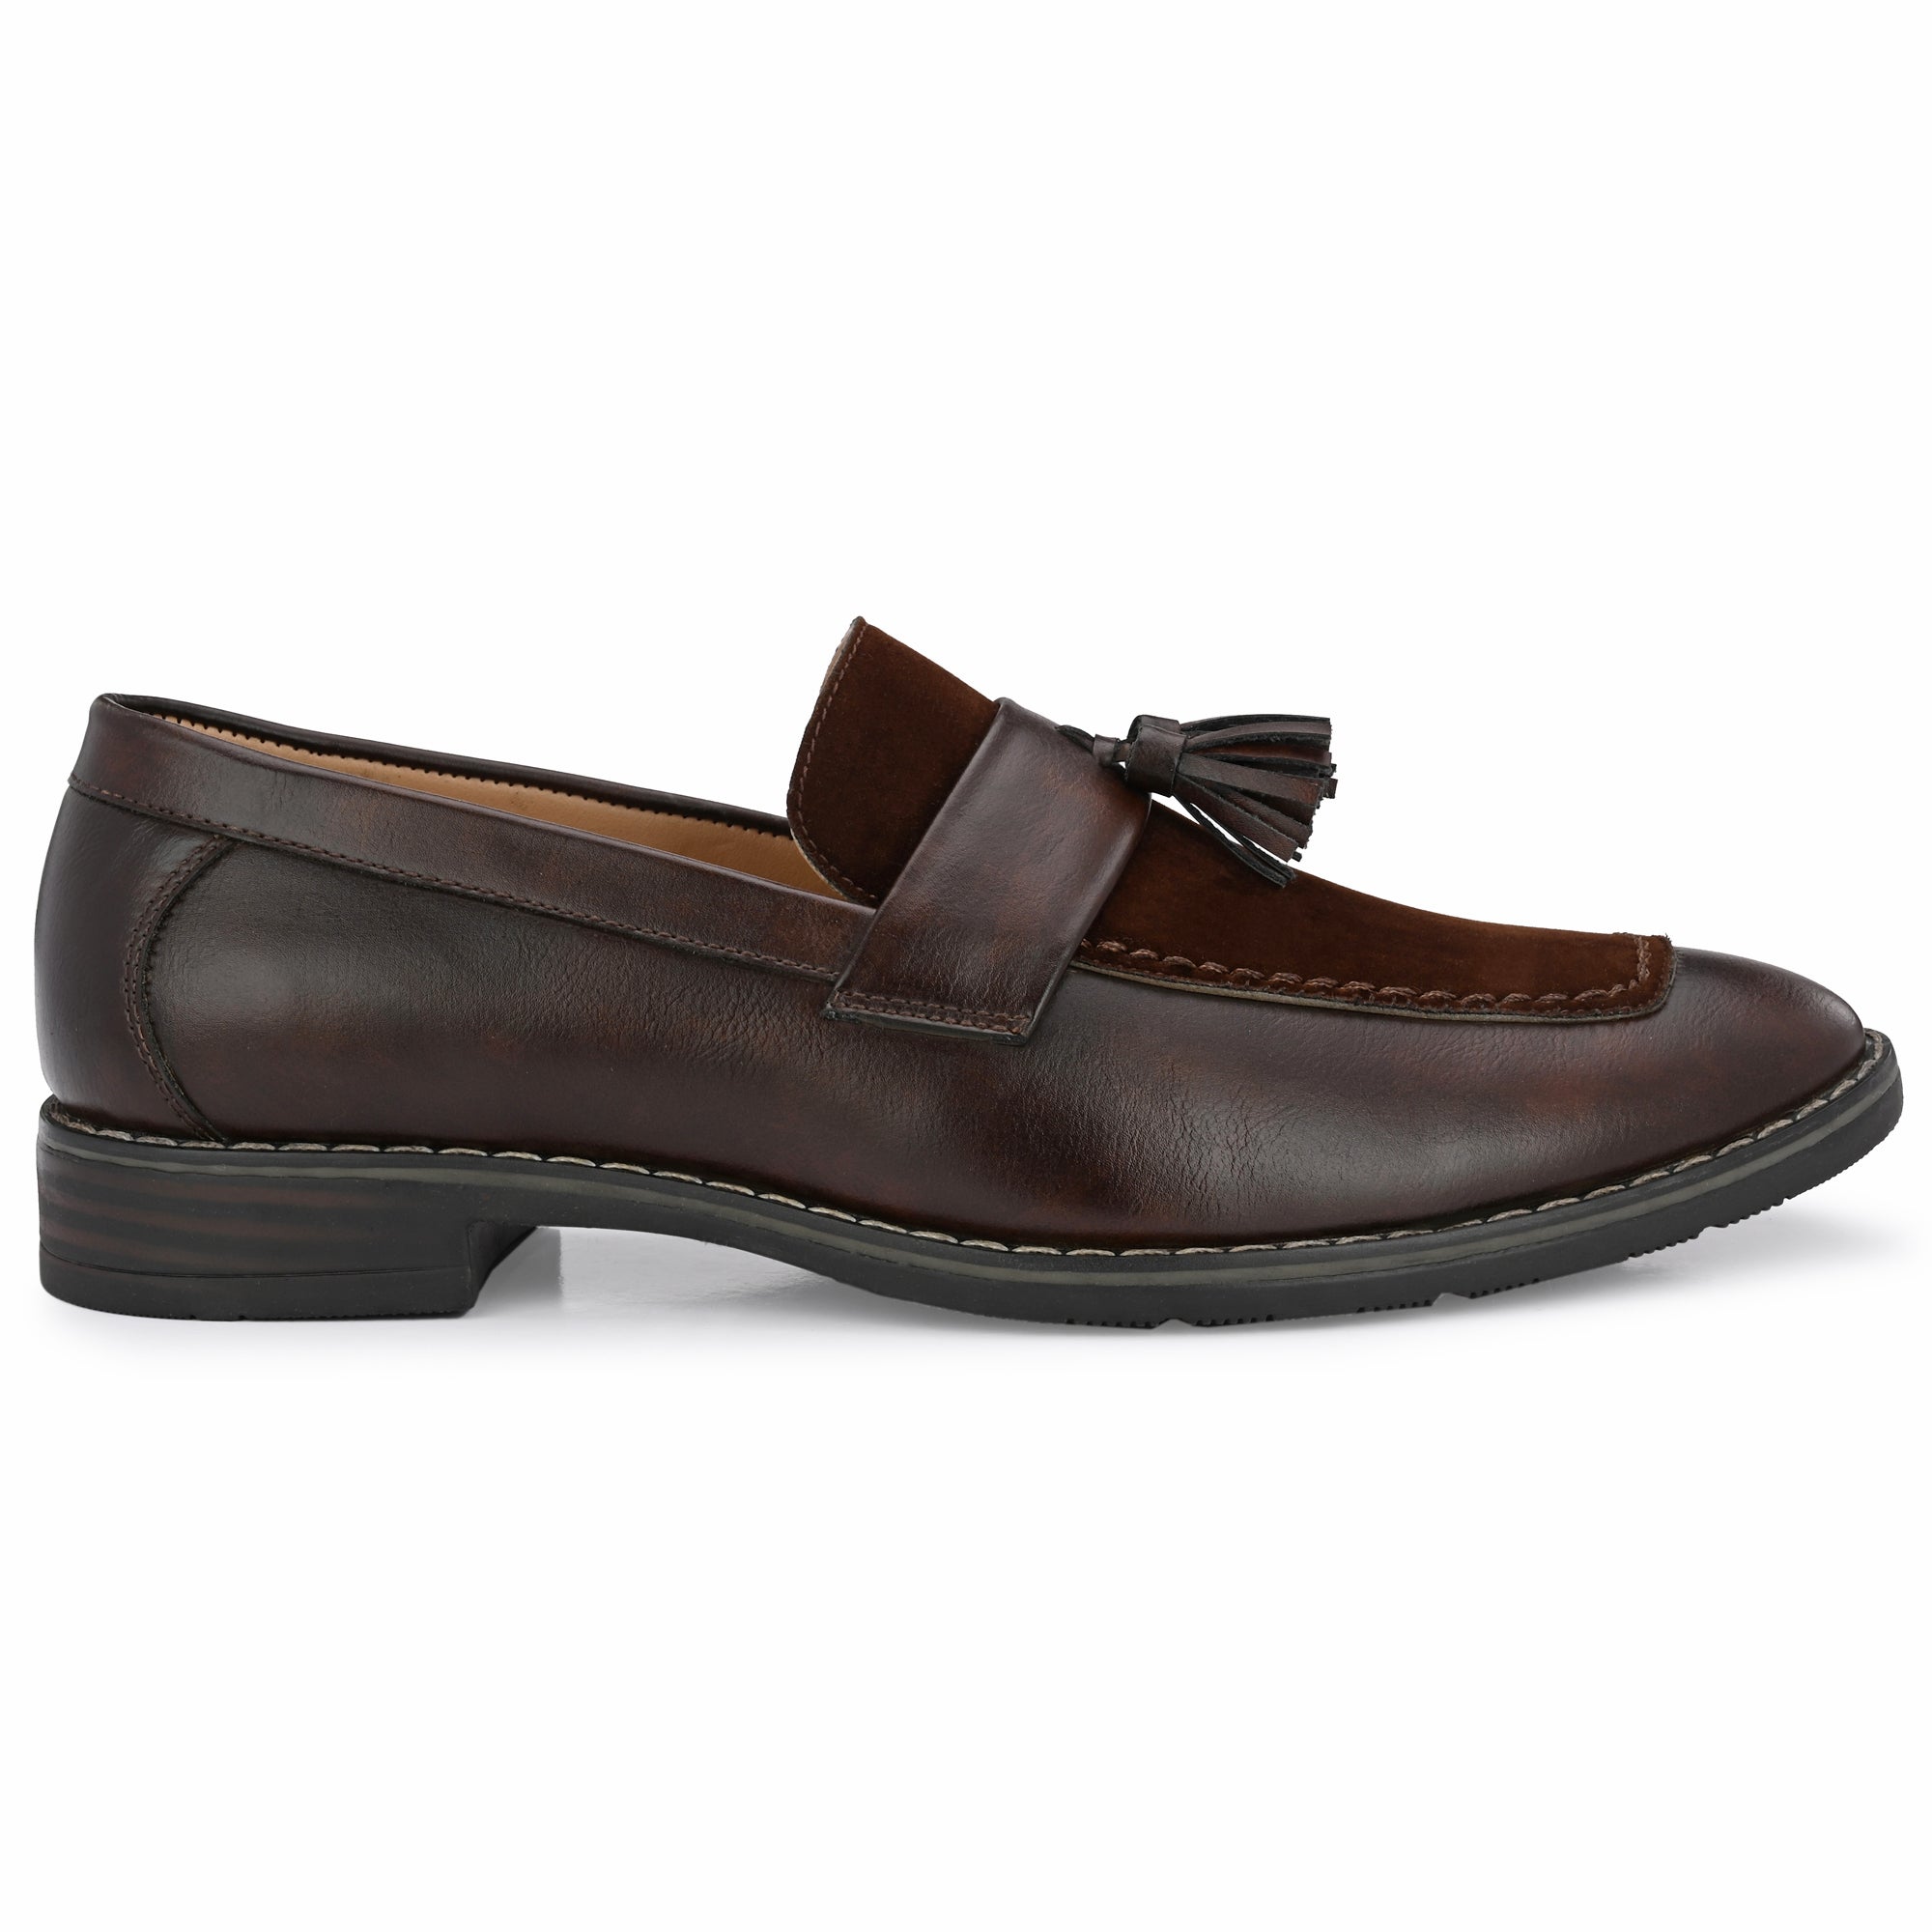 brown-loafers-attitudist-shoes-for-men-with-tassel-sp1b